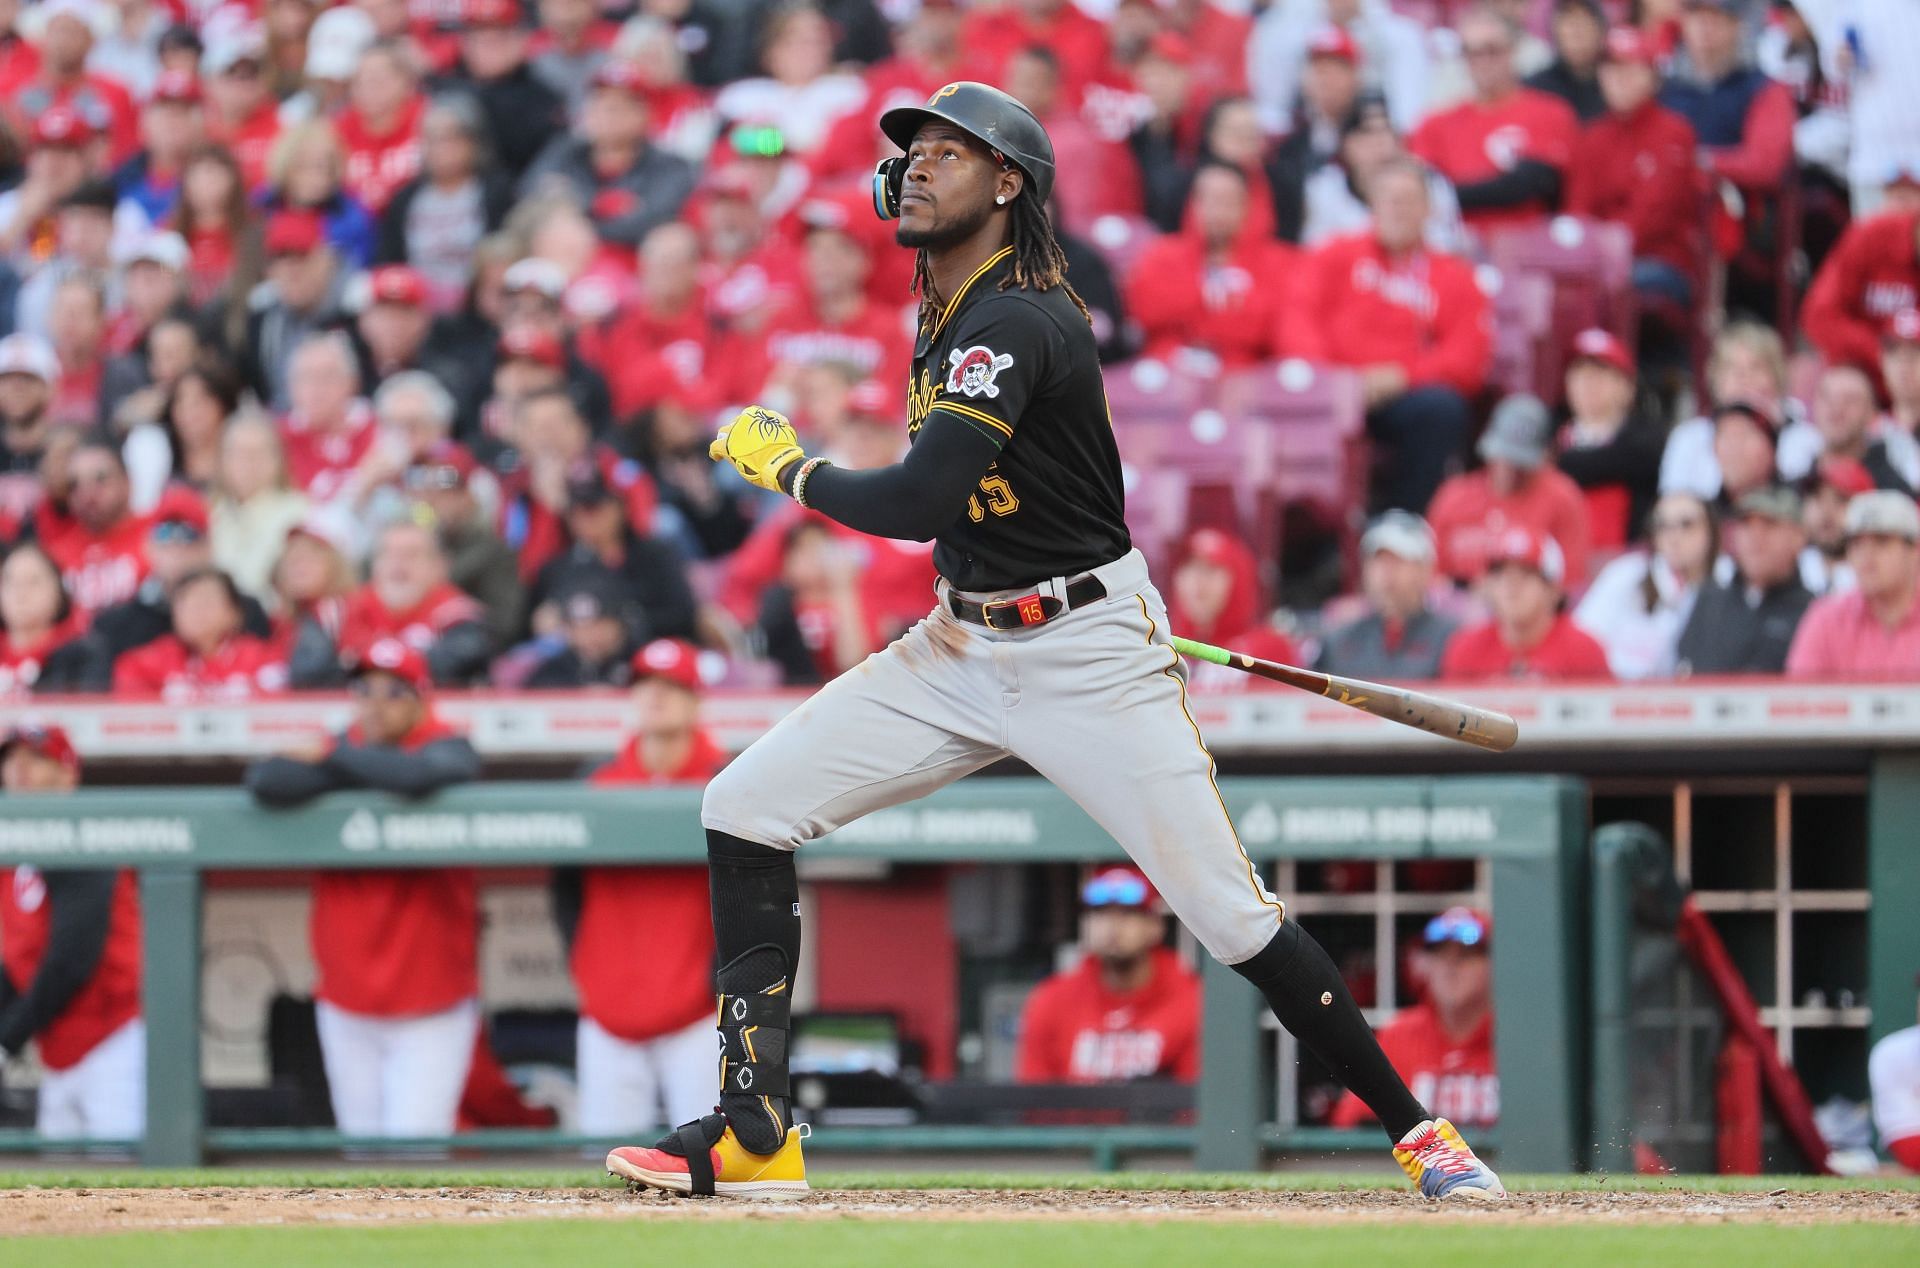 What happened to Oneil Cruz? Latest on Pirates shortstop after